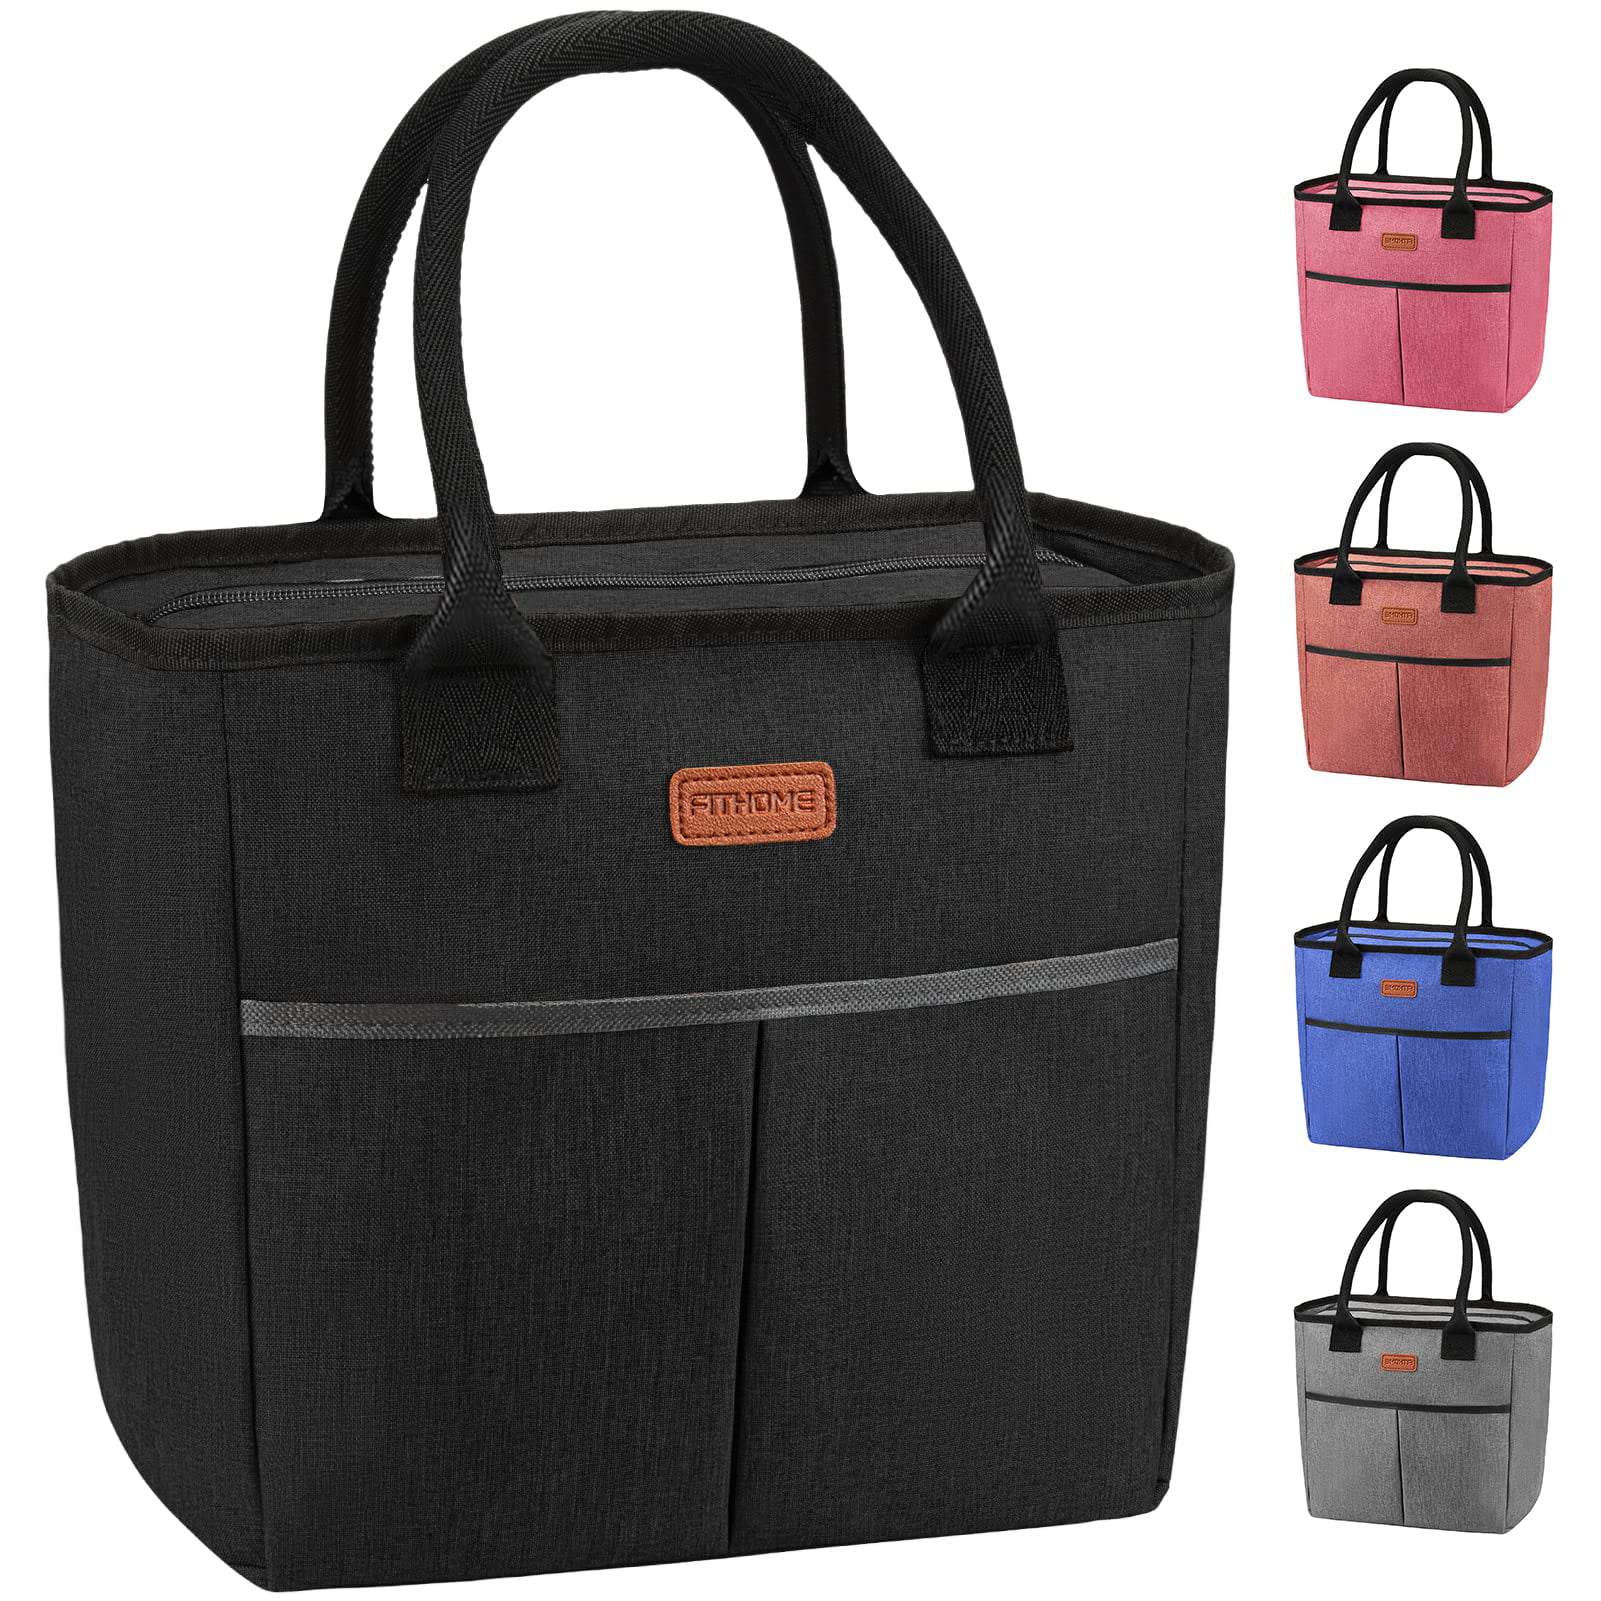 Cylinder type Picnic Bag Tote Fashion Woman Lnsulated Bags Ladies Lunch box  Handbag Organizers Student The Nurse Waterproof Lunch Bag Waterproof Heat  insulating package